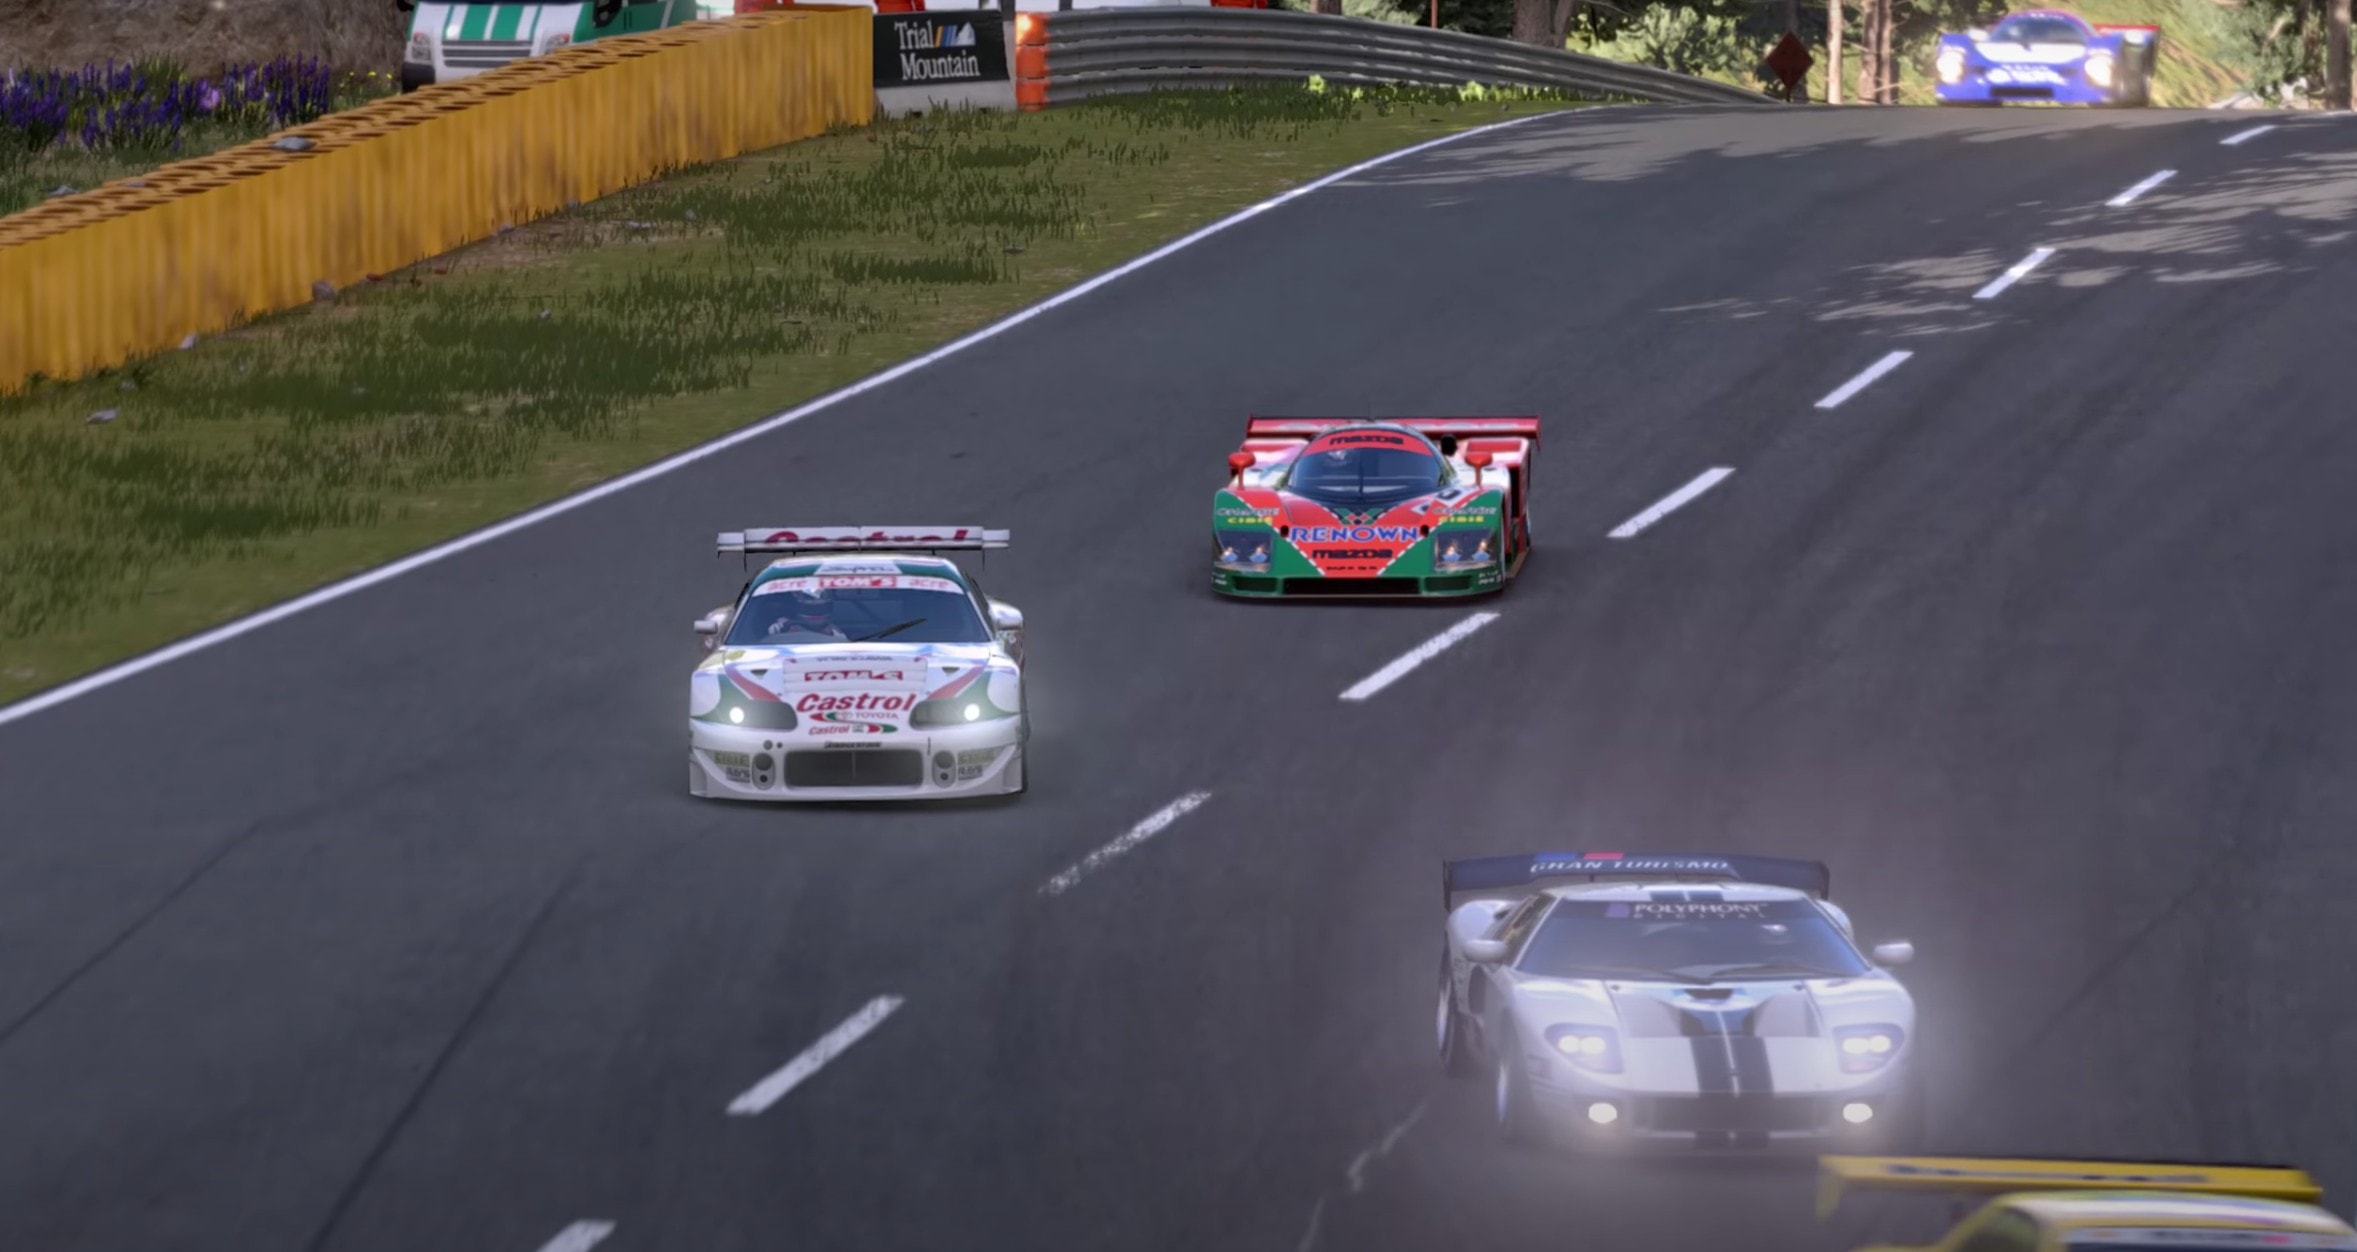 Gran Turismo 7 roars onto PS4 and PS5 in March